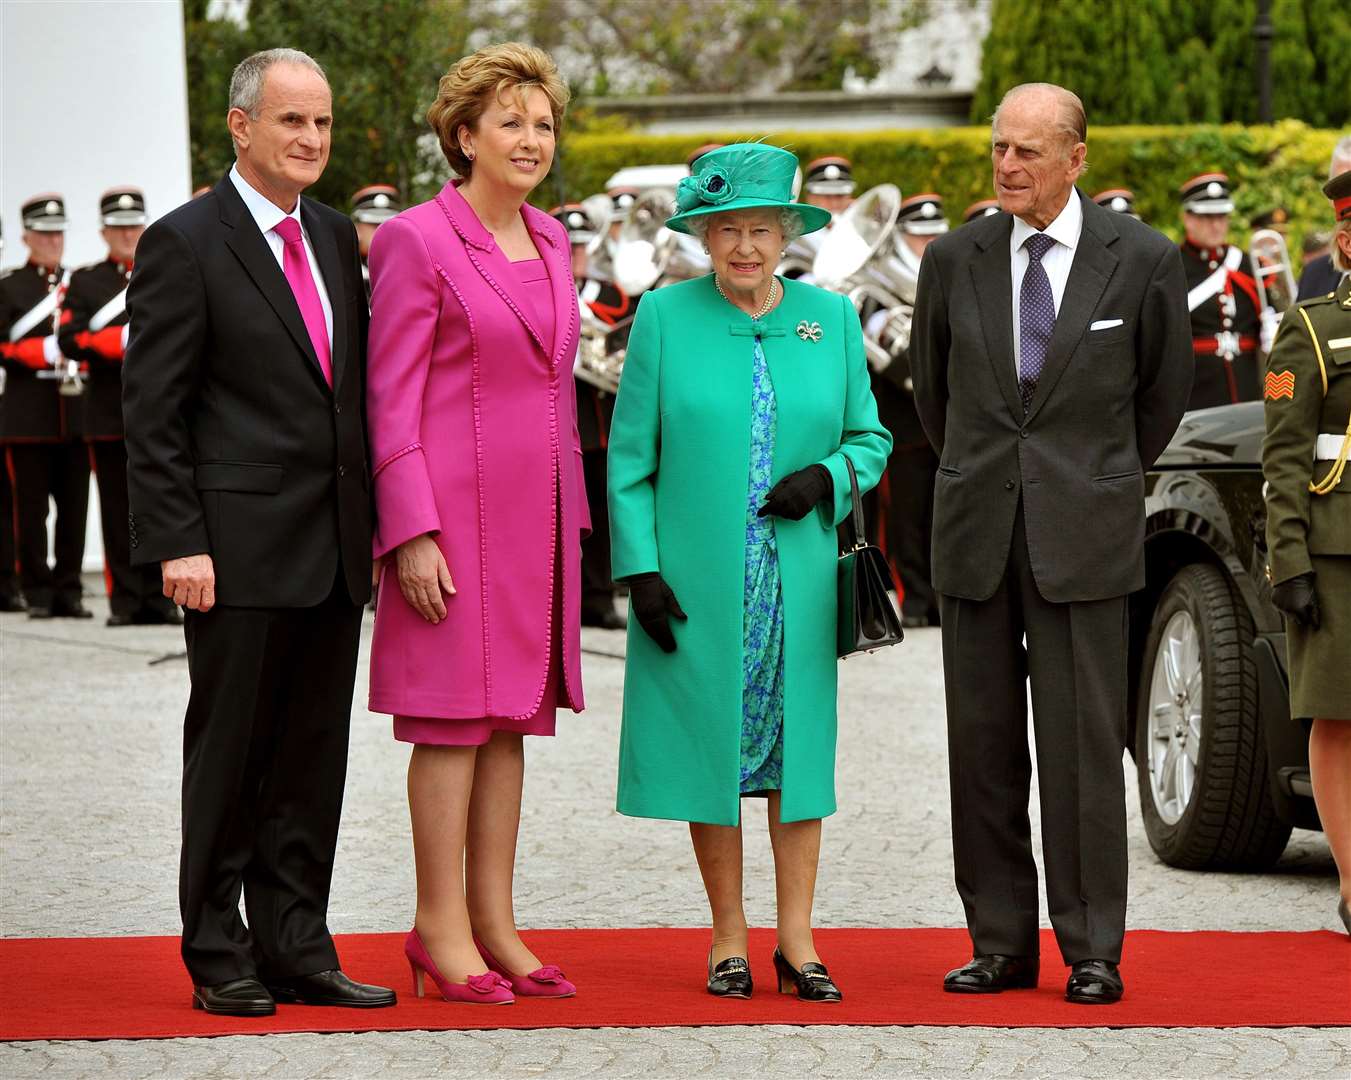 The Duke of Edinburgh with the Queen on her historic state visit to Ireland in 2011 (John Stillwell/PA)